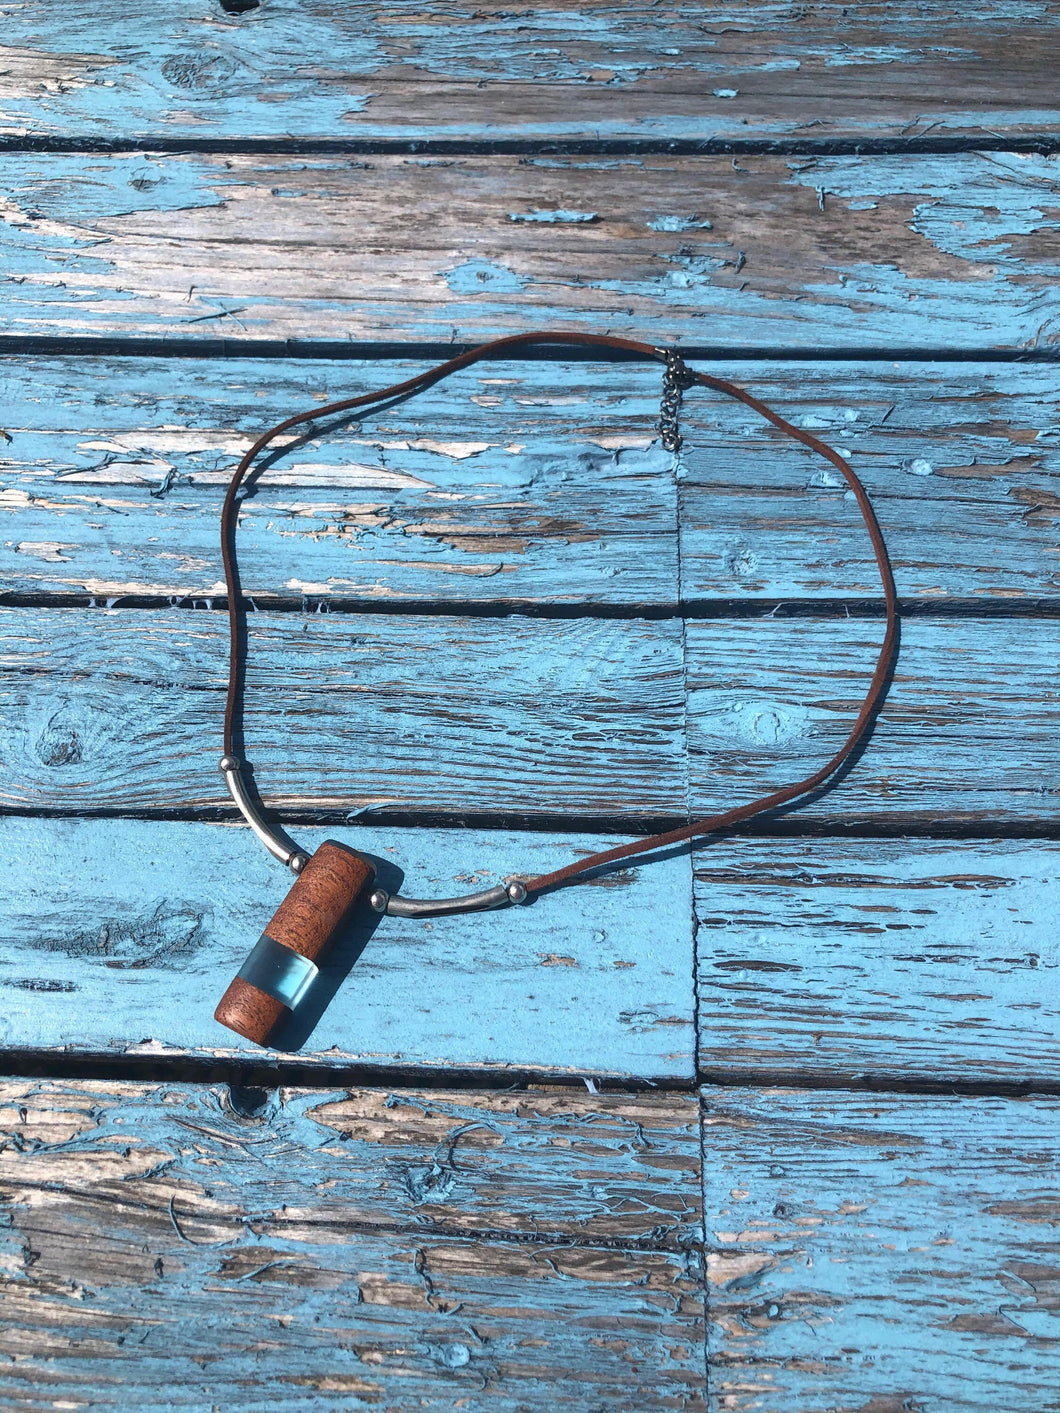 Pendant necklace handmade out of reclaimed hard wood and resin. On adjustable suede cord.